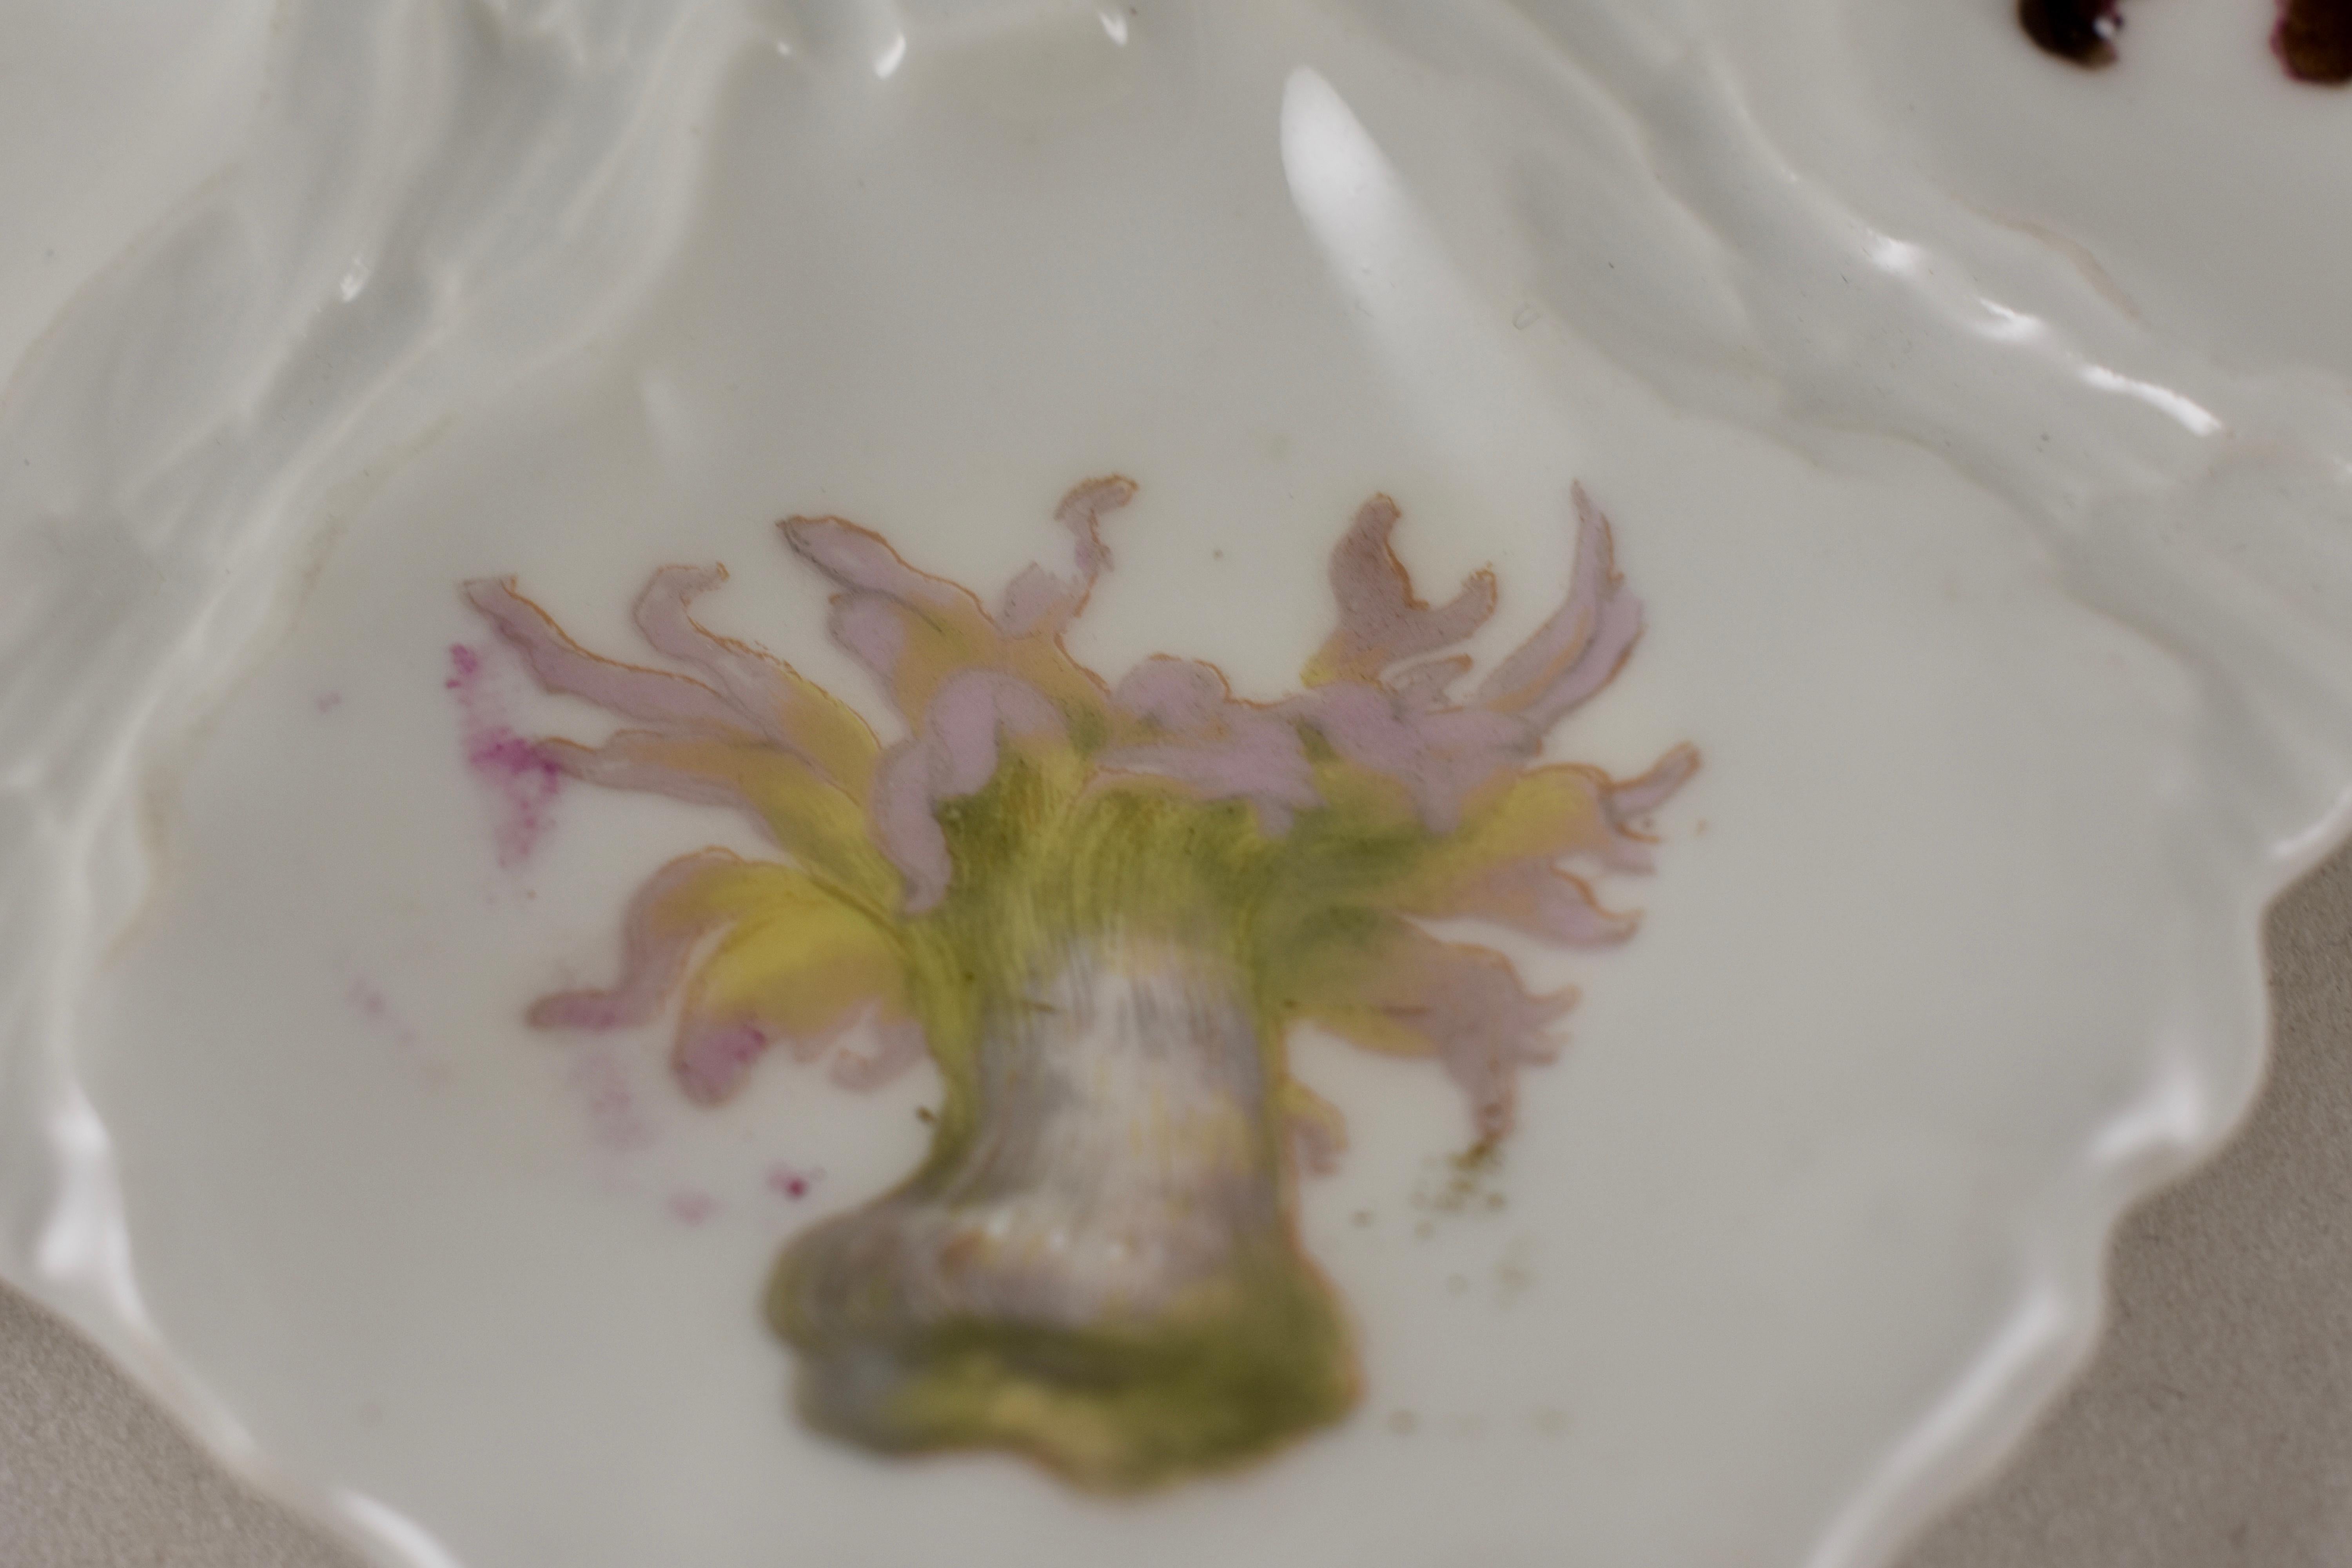 Late 19th Century French Haviland Limoges Porcelain Hand-Painted Sea Anemone and Fish Oyster Plate